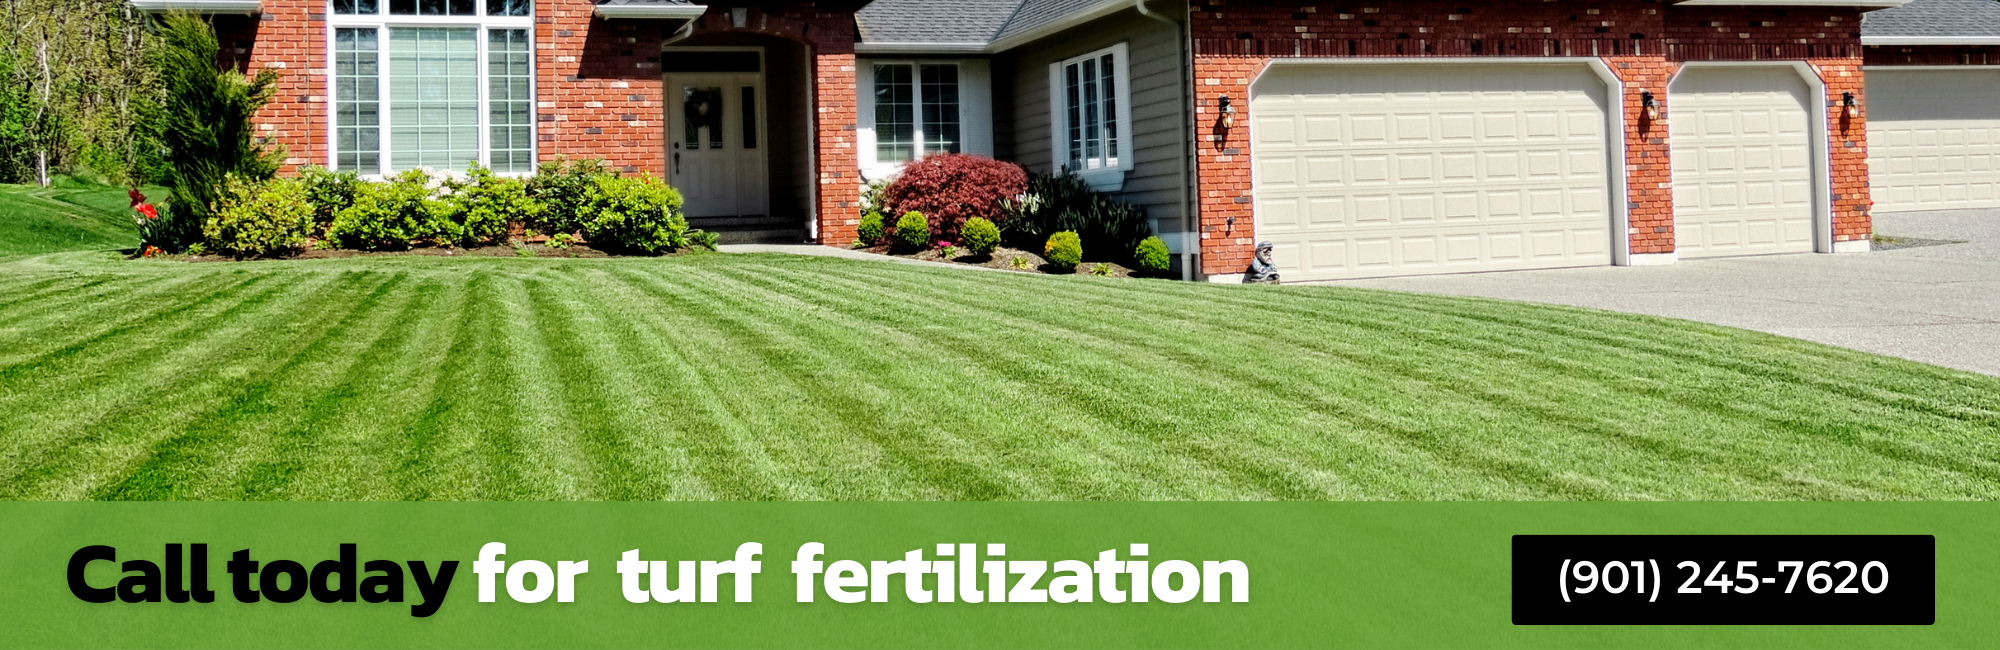 Call today for  turf  fertilization 